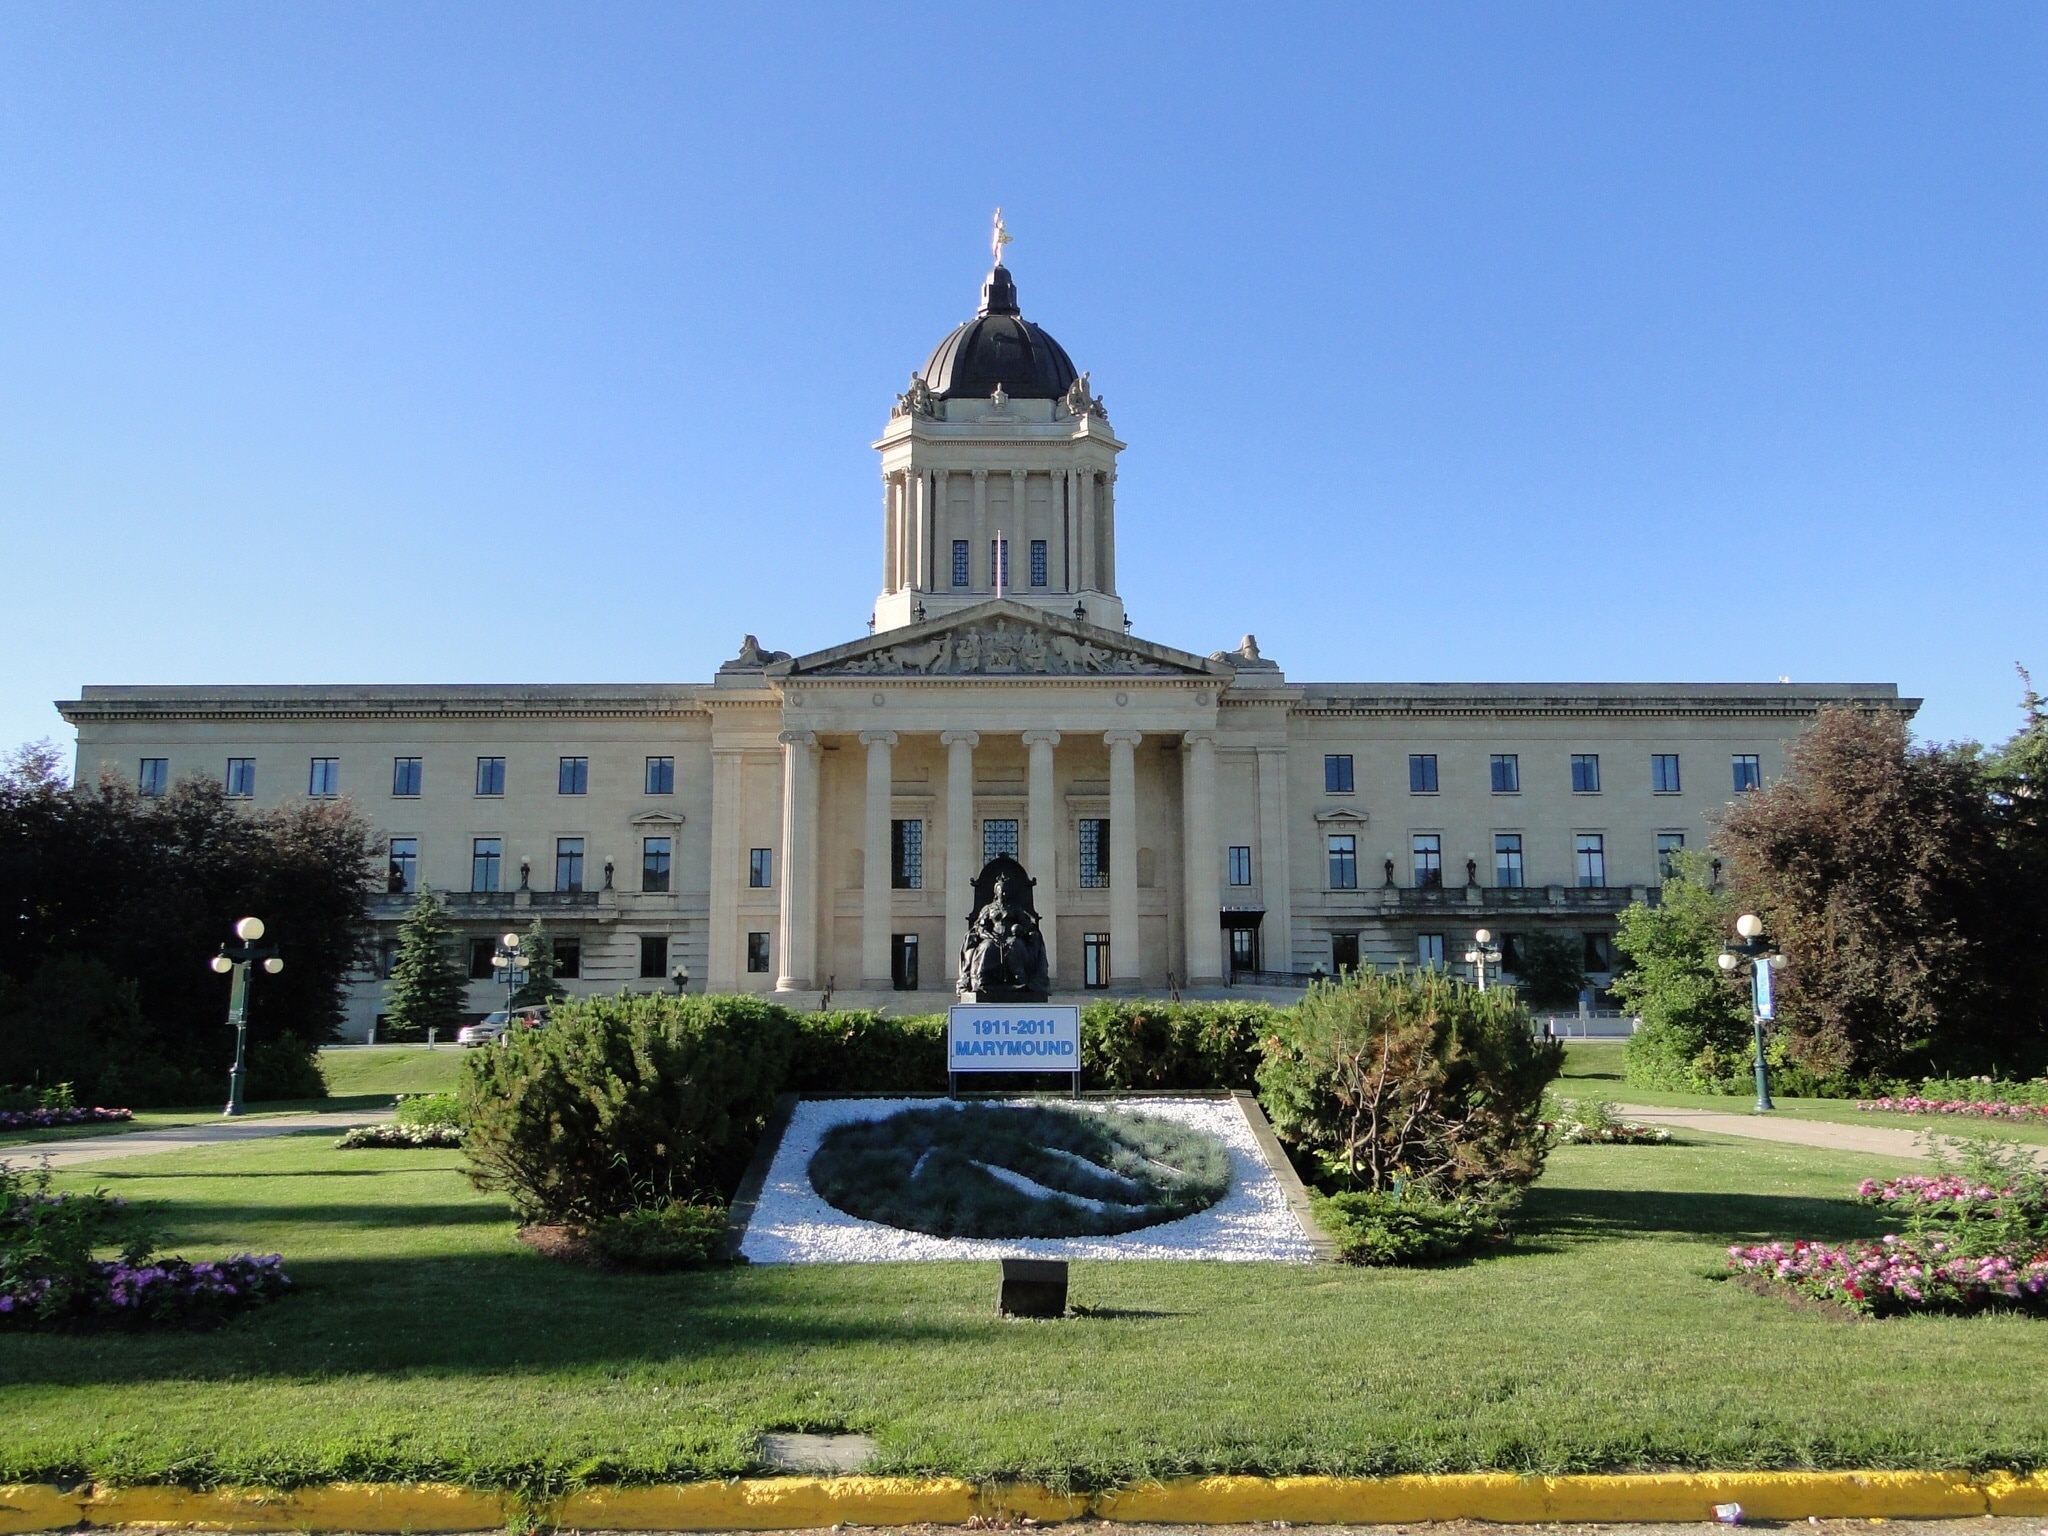 Passing through Winnipeg stopped to get a quick picture of the legislative building.